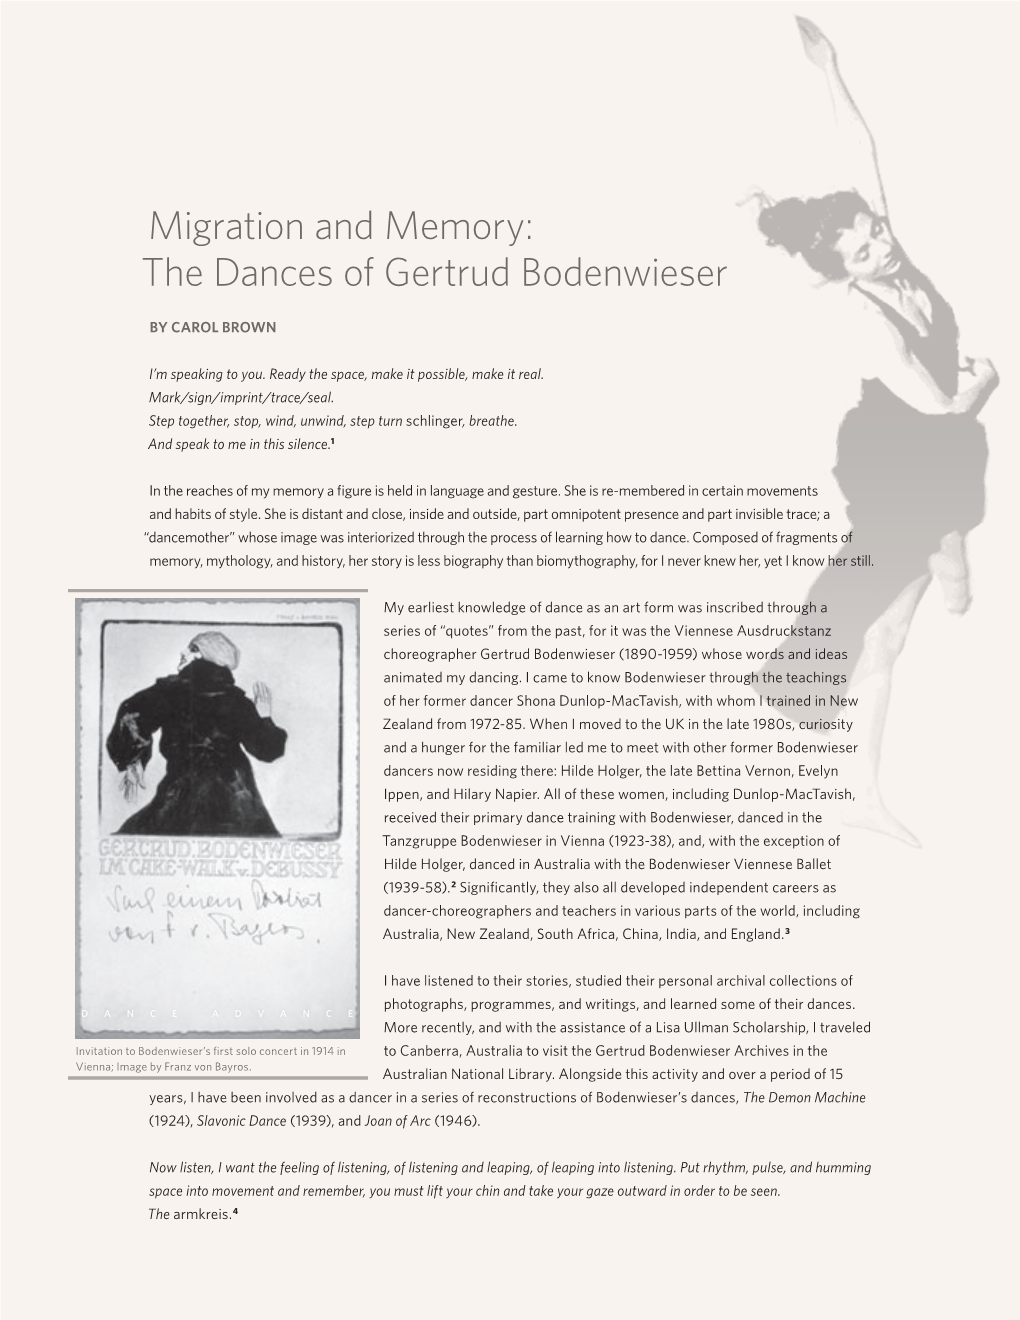 Migration and Memory: the Dances of Gertrud Bodenwieser